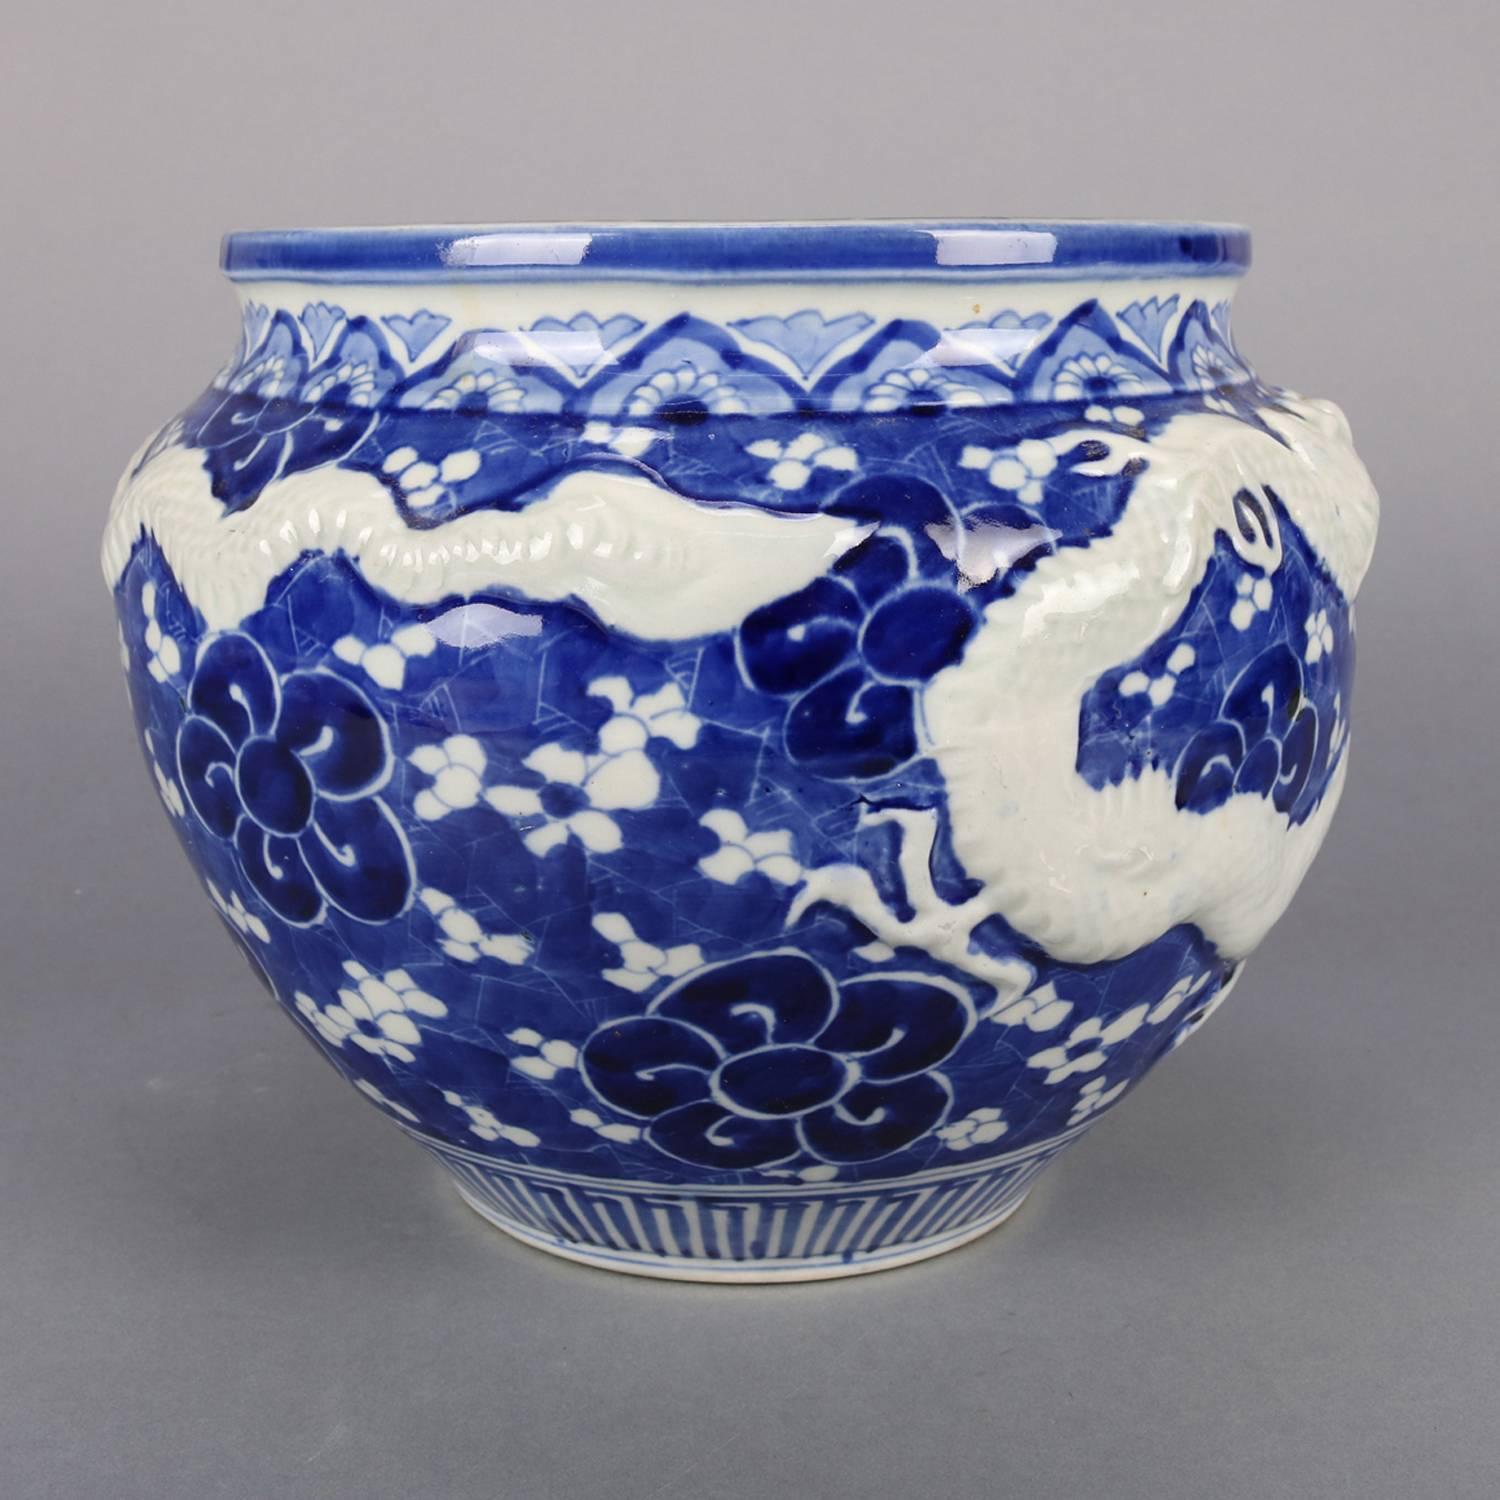 Chinese porcelain jardeniere features high relief dragon, hand painted allover floral decoration, collar with stylized tobacco leaf design, blue and white, 20th century

***DELIVERY NOTICE – Due to COVID-19 we are employing NO-CONTACT PRACTICES in